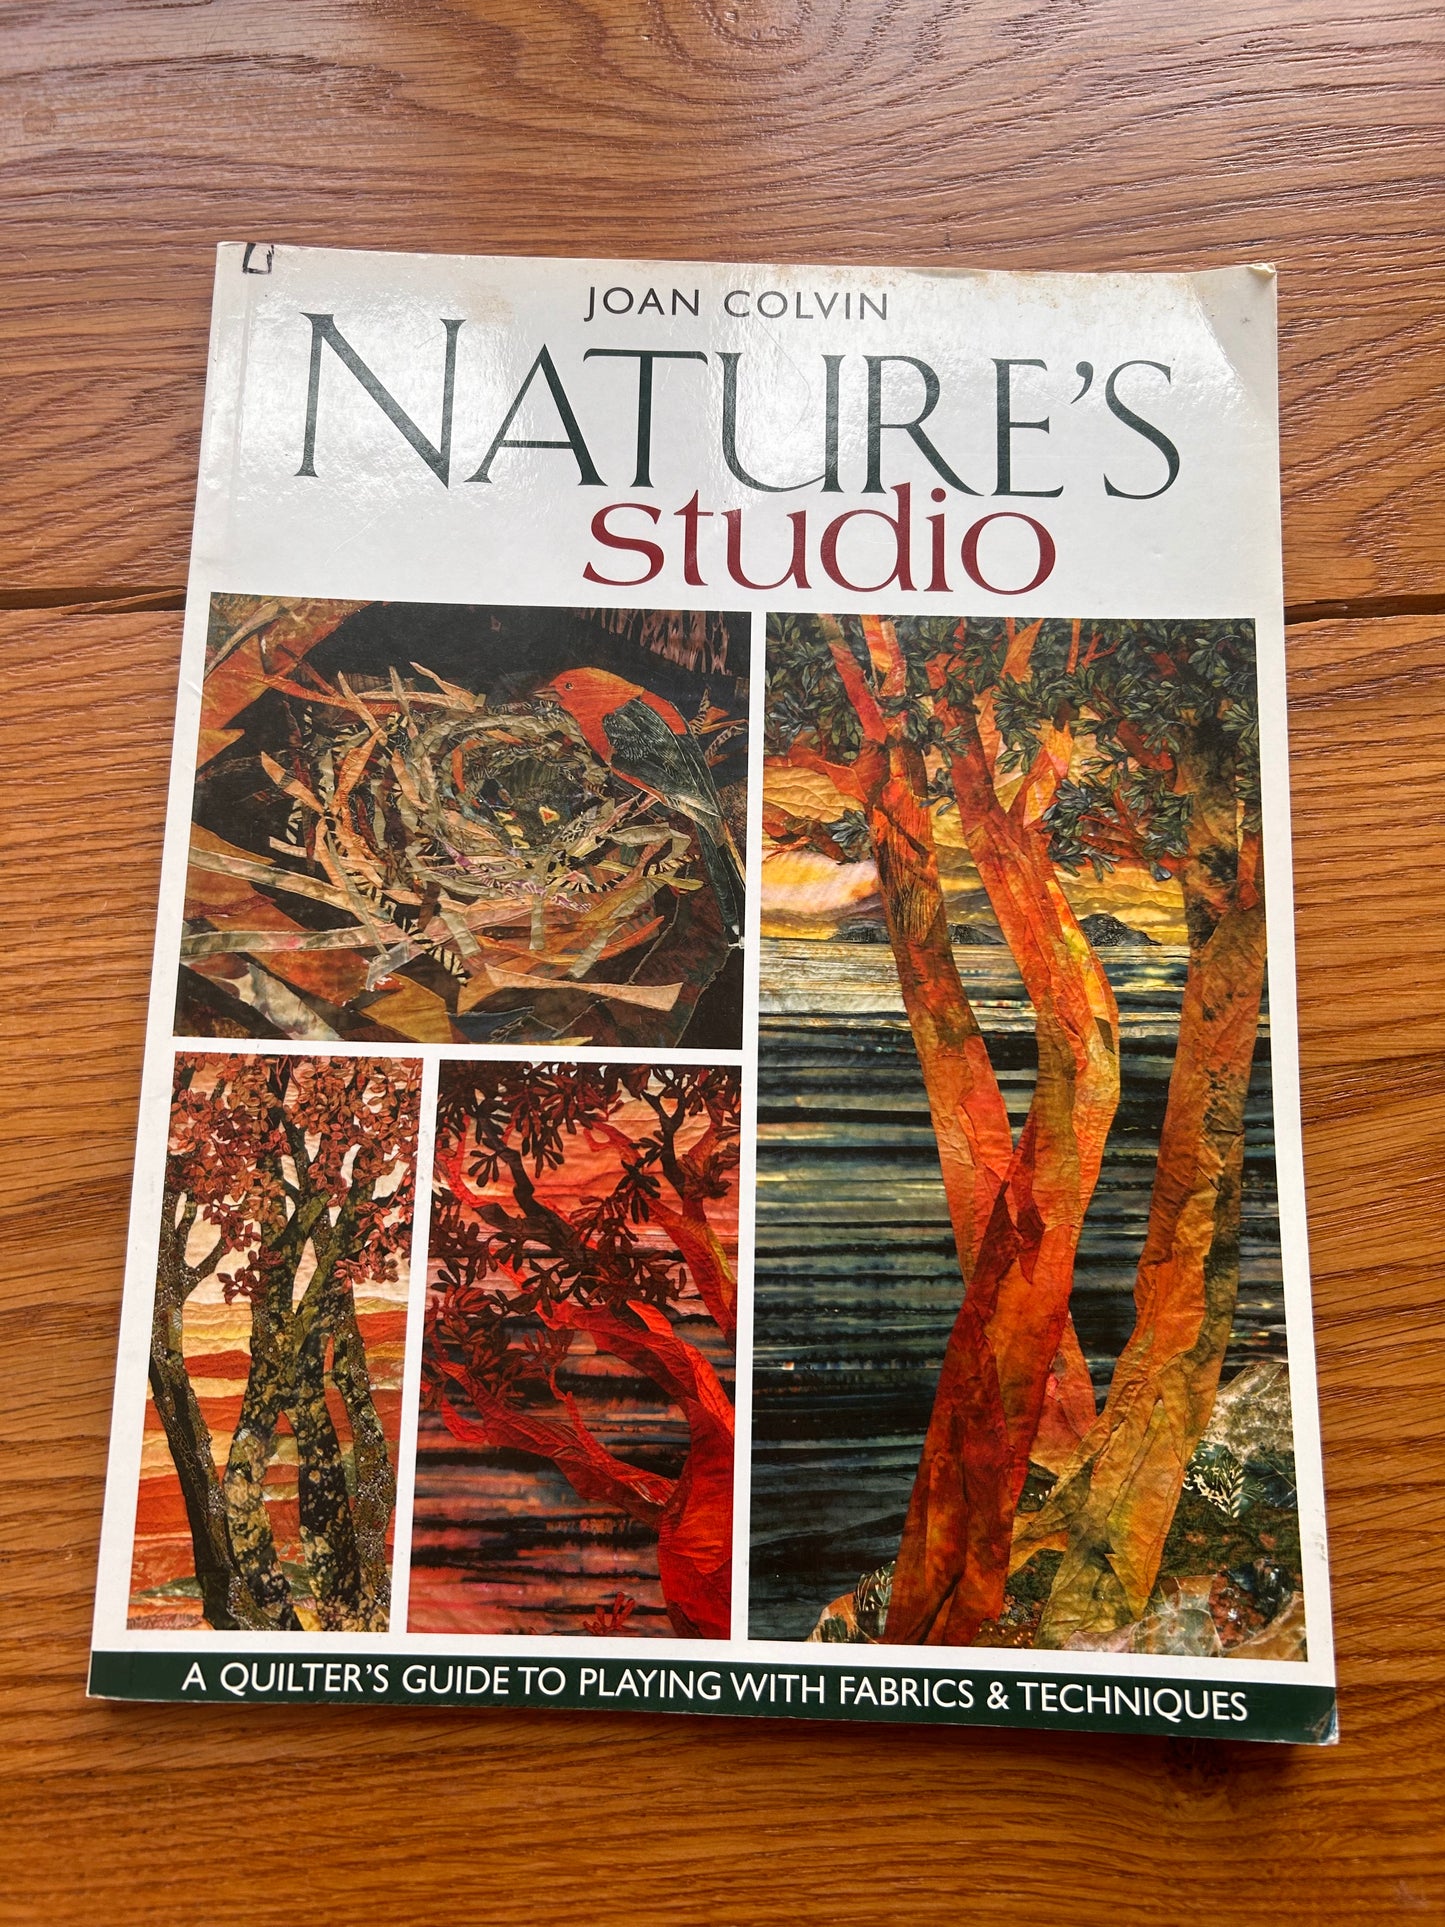 Nature's Studio: A Quilter's Guide to Playing with Fabrics & Techniques